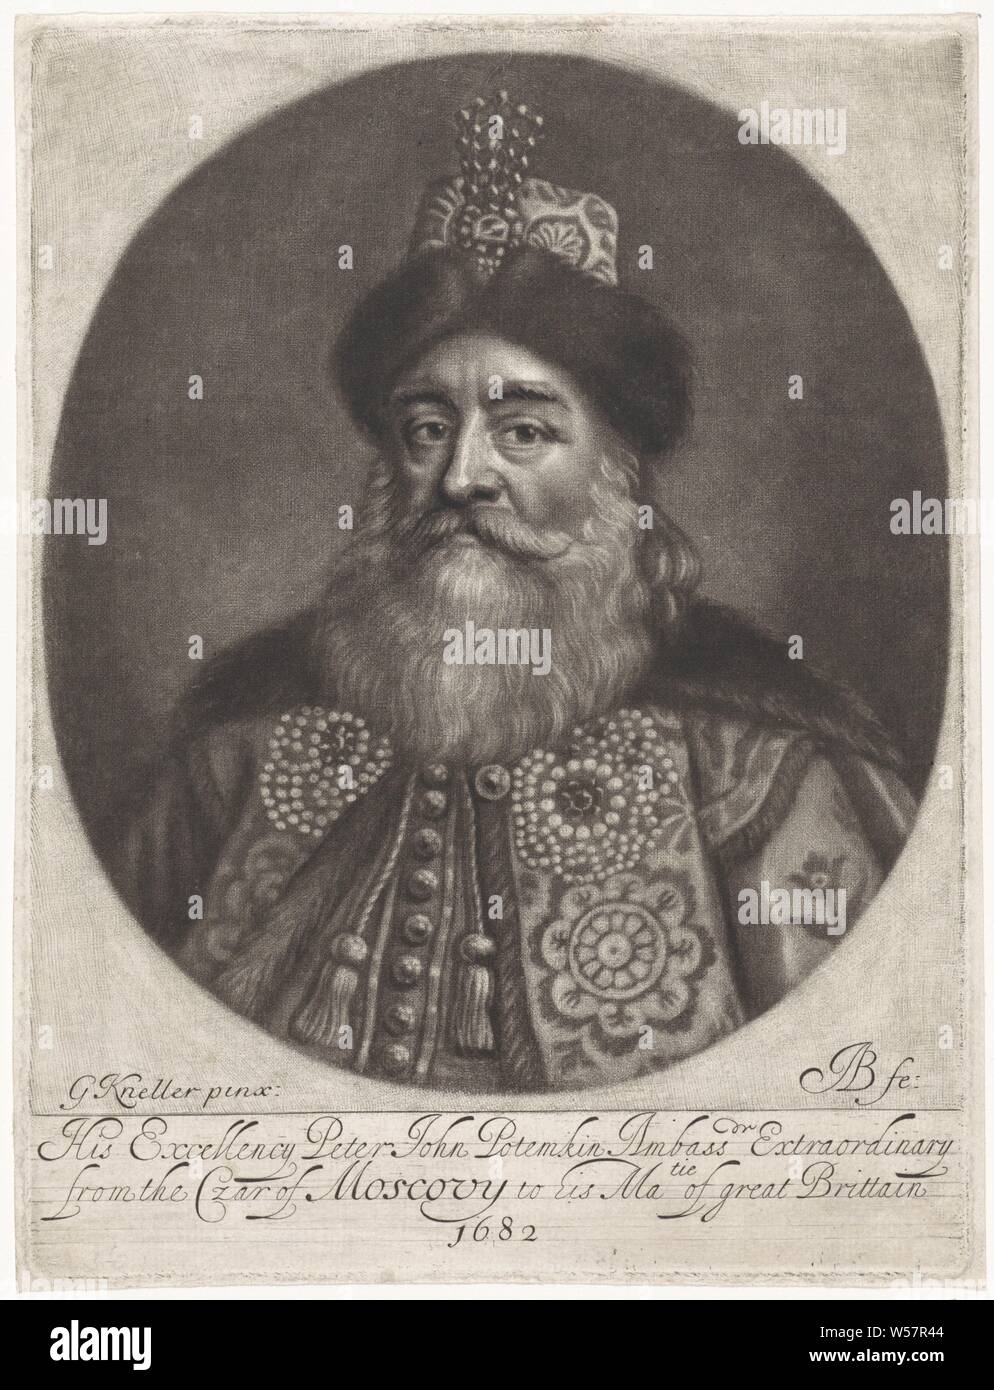 Portrait of Peter John Potemkin, Portrait of Peter John Potemkin (Piotr Ivanovich Potemkin), Ambassador of Russia to London, Peter John Potemkin, Abraham Bloteling (mentioned on object), Amsterdam, 1682, paper, engraving, h 190 mm × w 142 mm Stock Photo